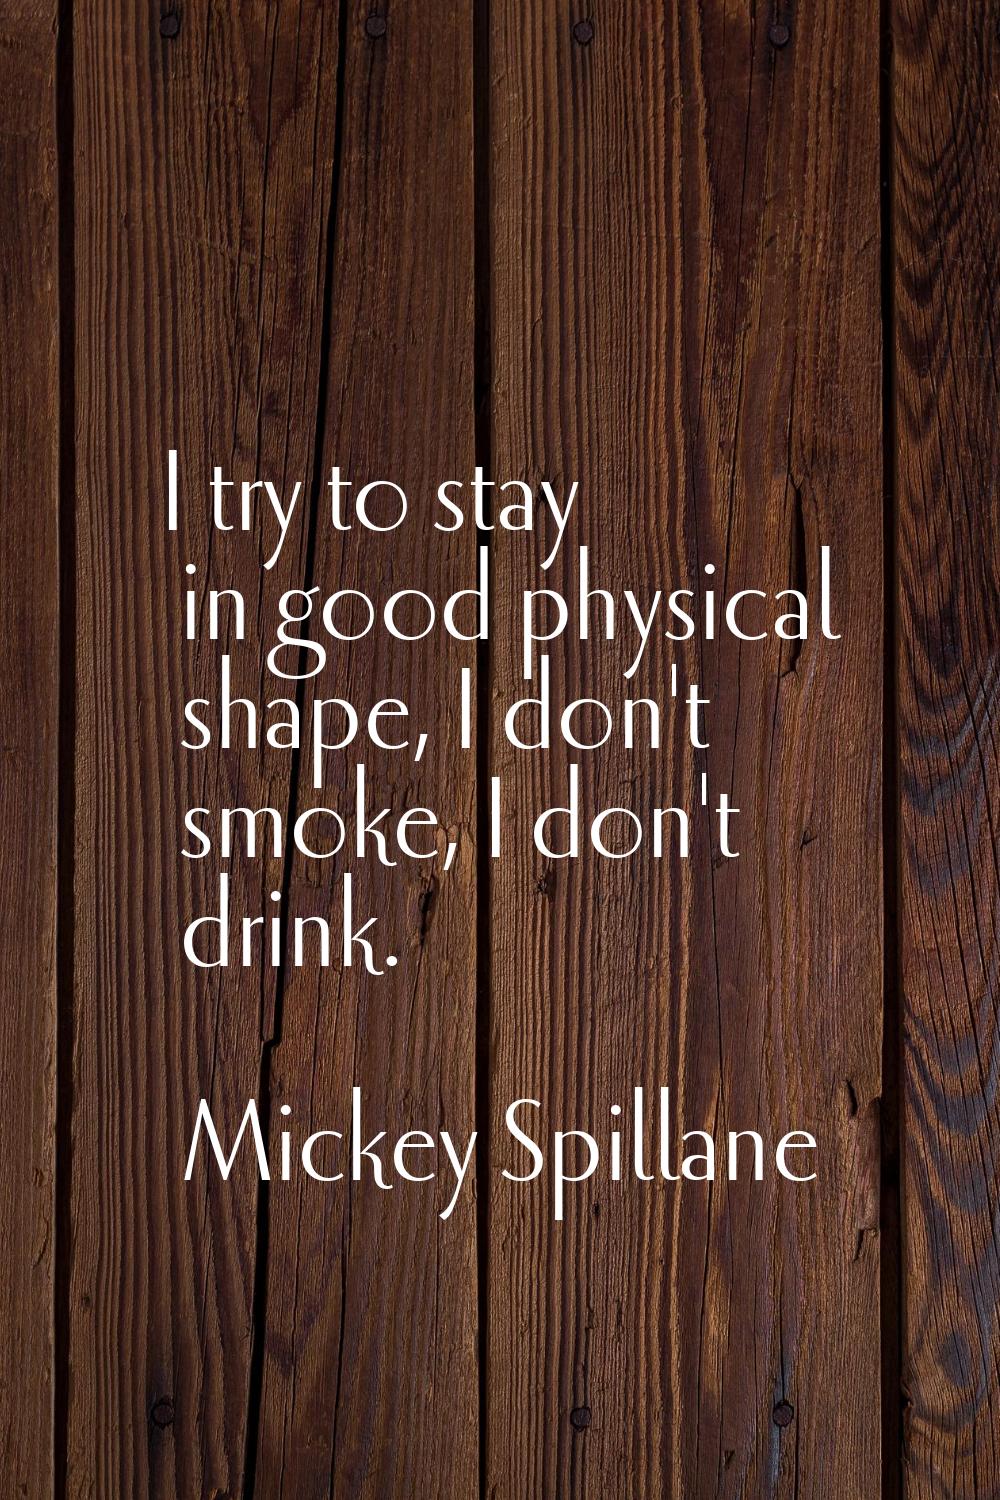 I try to stay in good physical shape, I don't smoke, I don't drink.